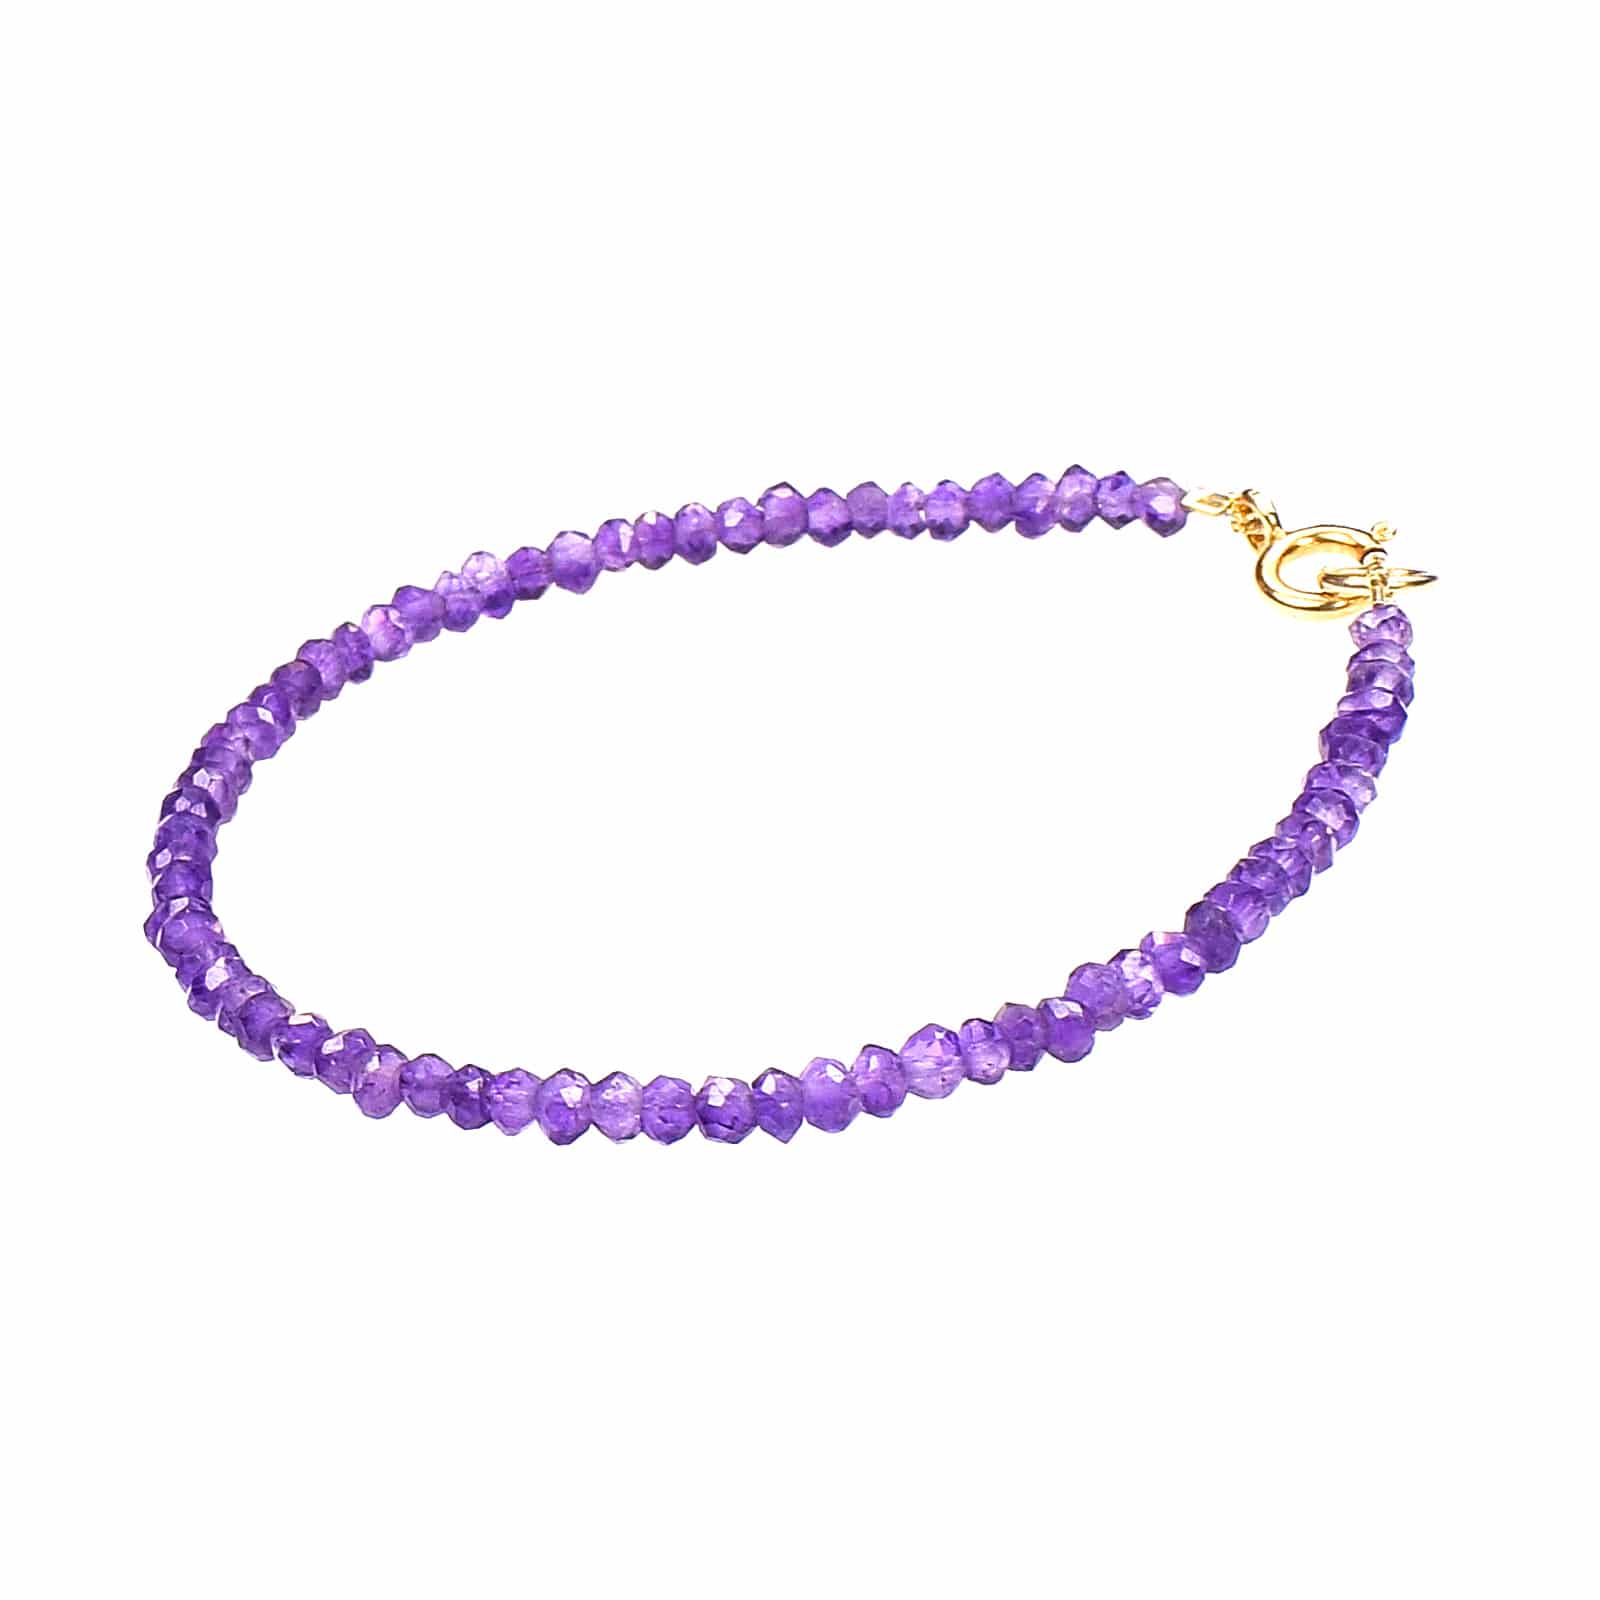 .Handmade bracelet made of natural Amethyst and clasp made of gold plated sterling silver. A beautiful bracelet for every day! Buy online shop.